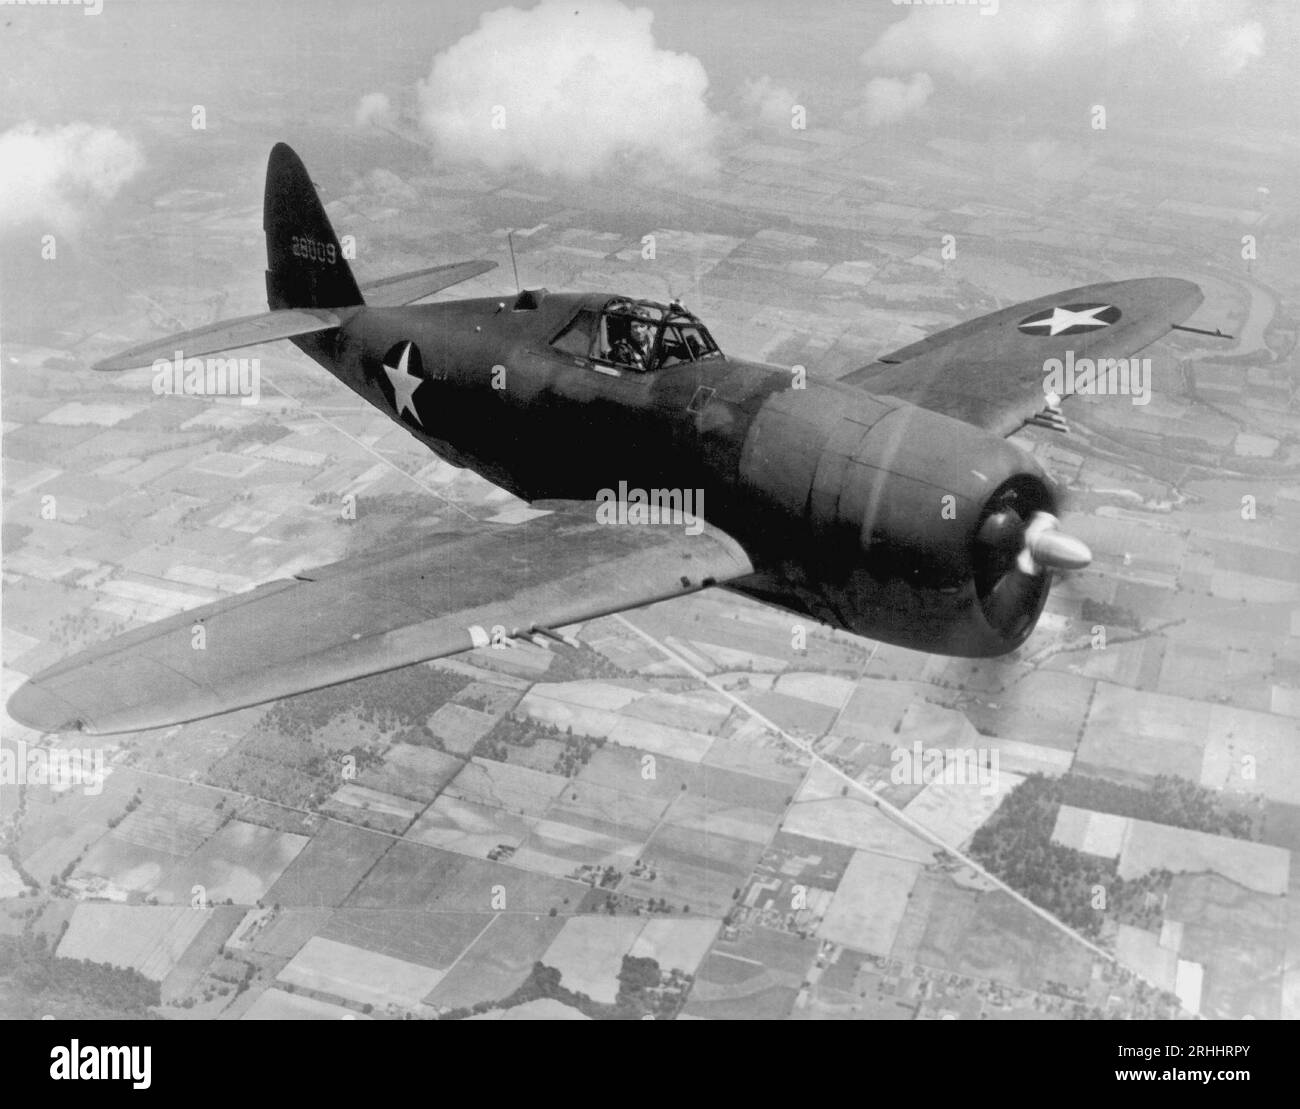 EUROPE - circa 1944 - A Republic P-47D Thunderbolt, nicknamed 'Jug,'  During WW II, the P-47 served in almost every active war theater and in the forc Stock Photo